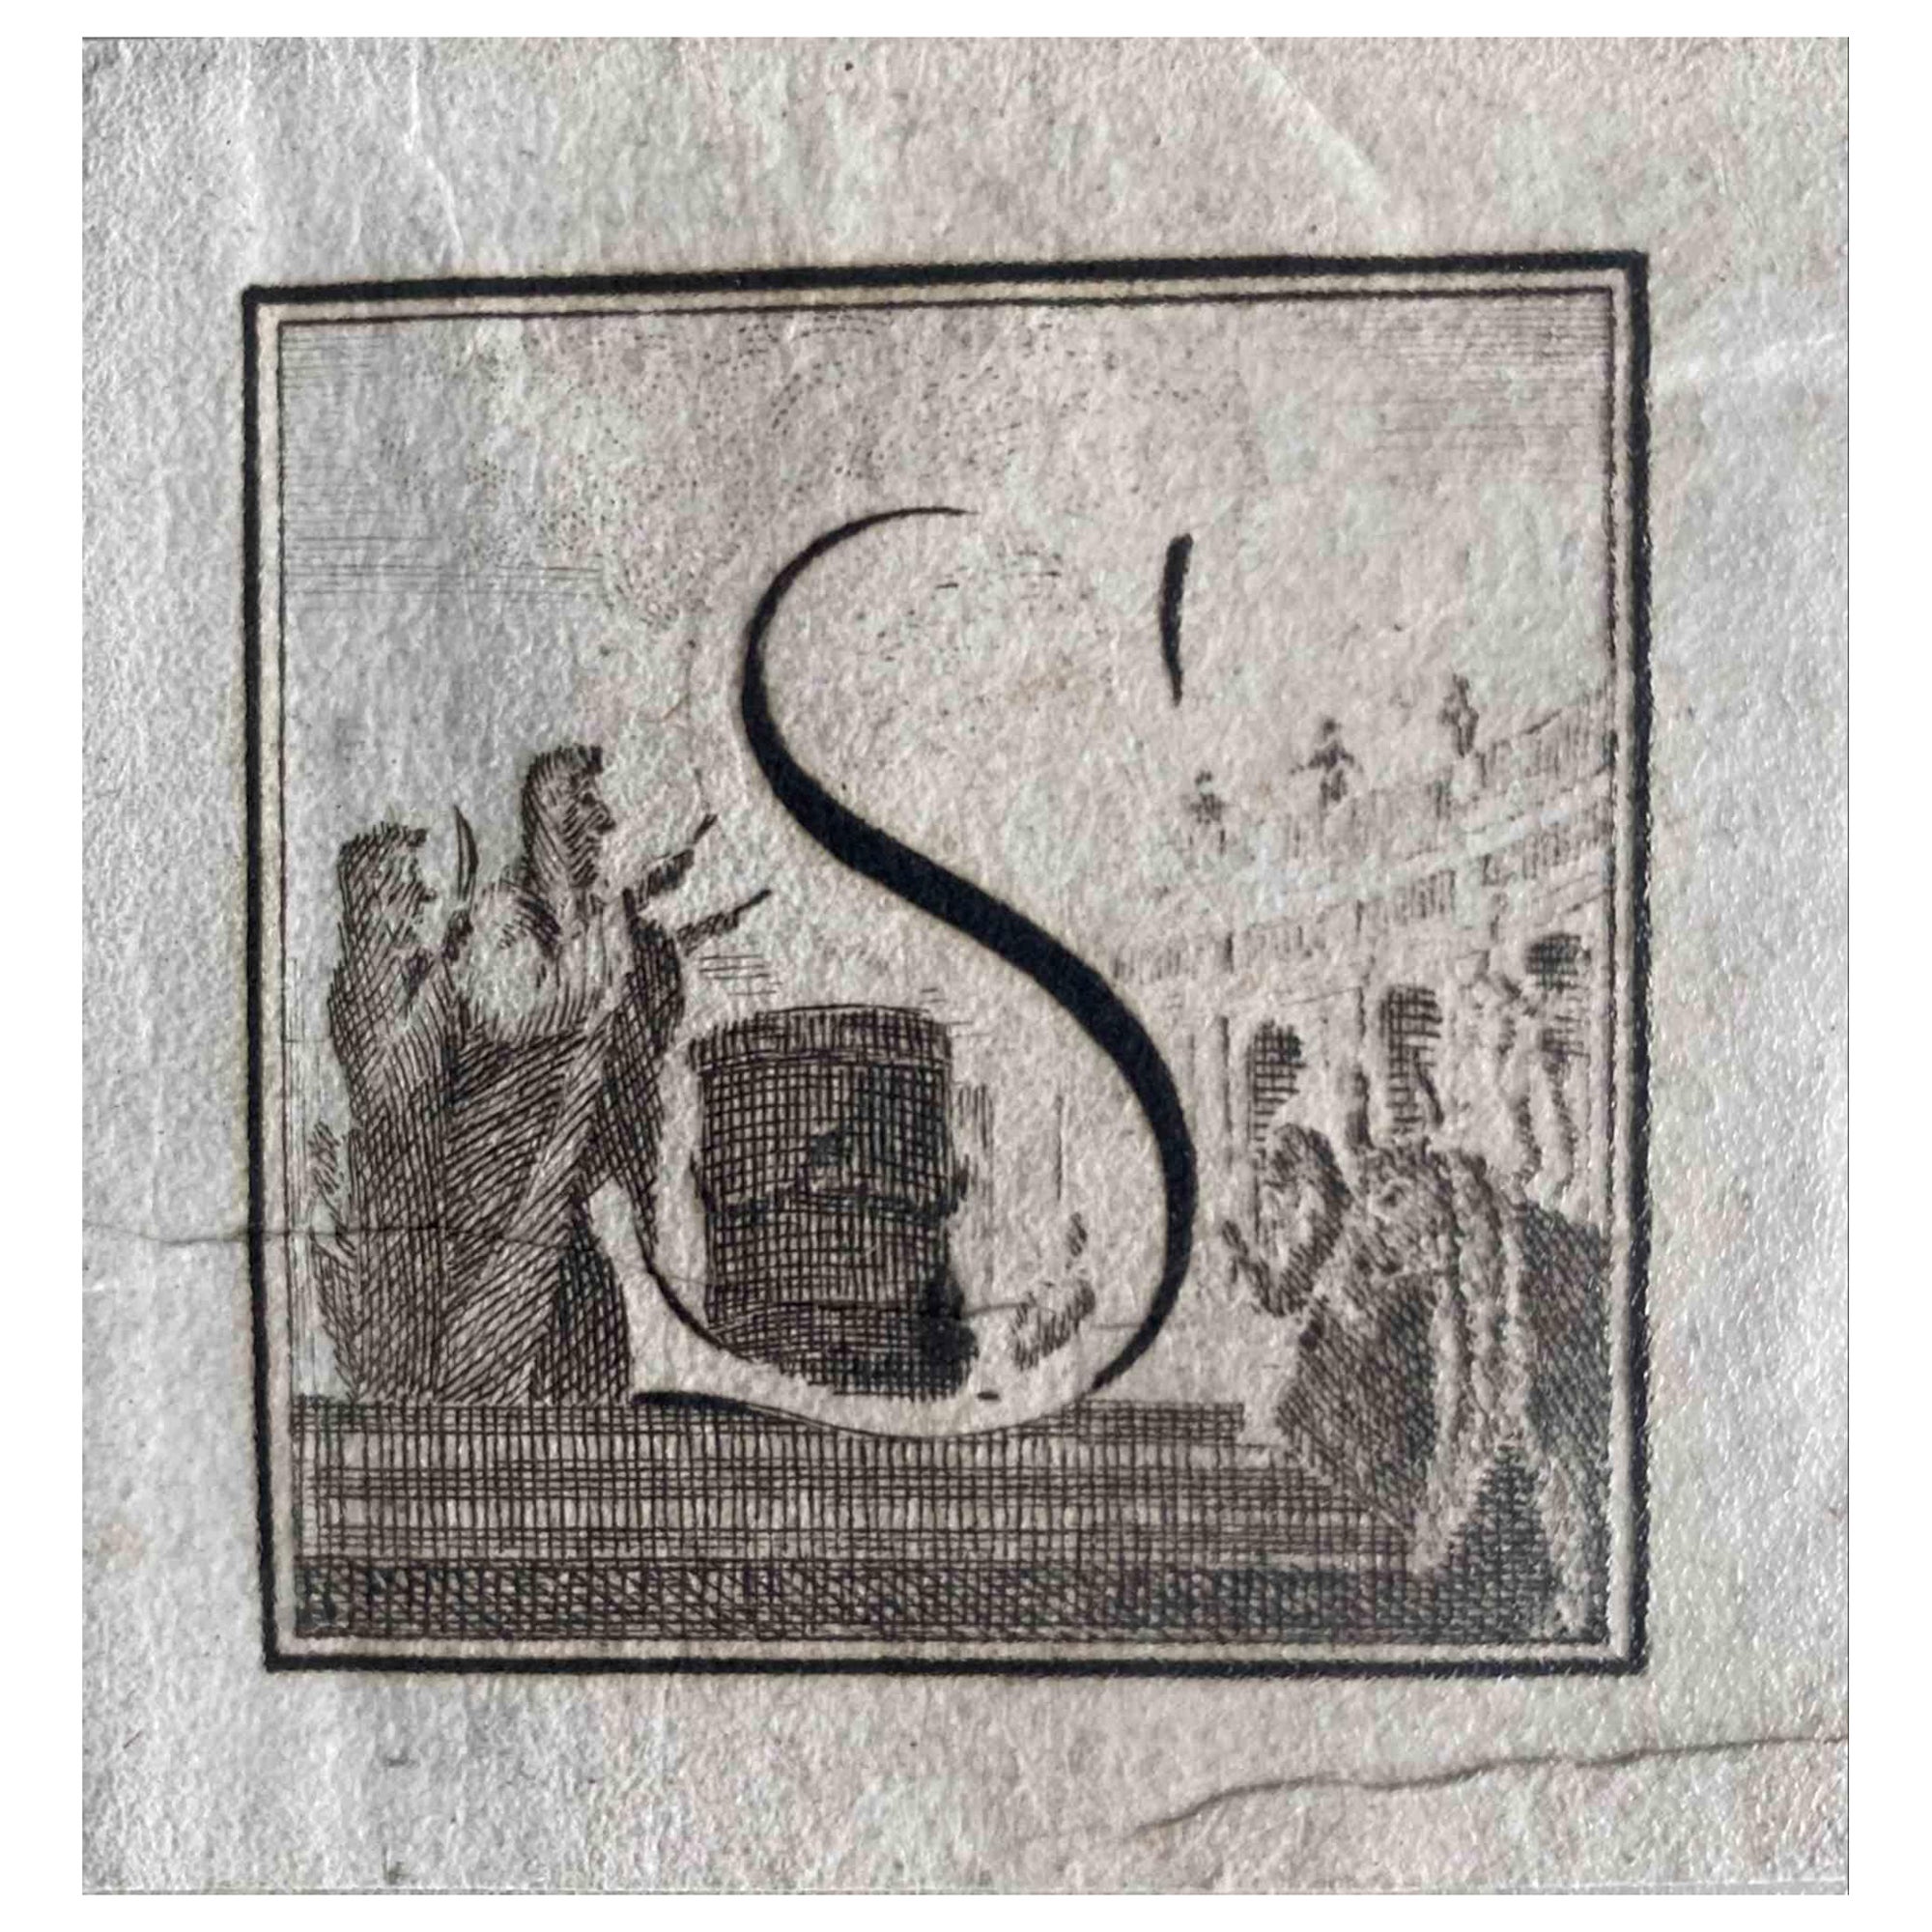 Carlo Nolli Figurative Print - Antiquities of Herculaneum -  Letter of the Alphabet  S - Etching - 18th Century